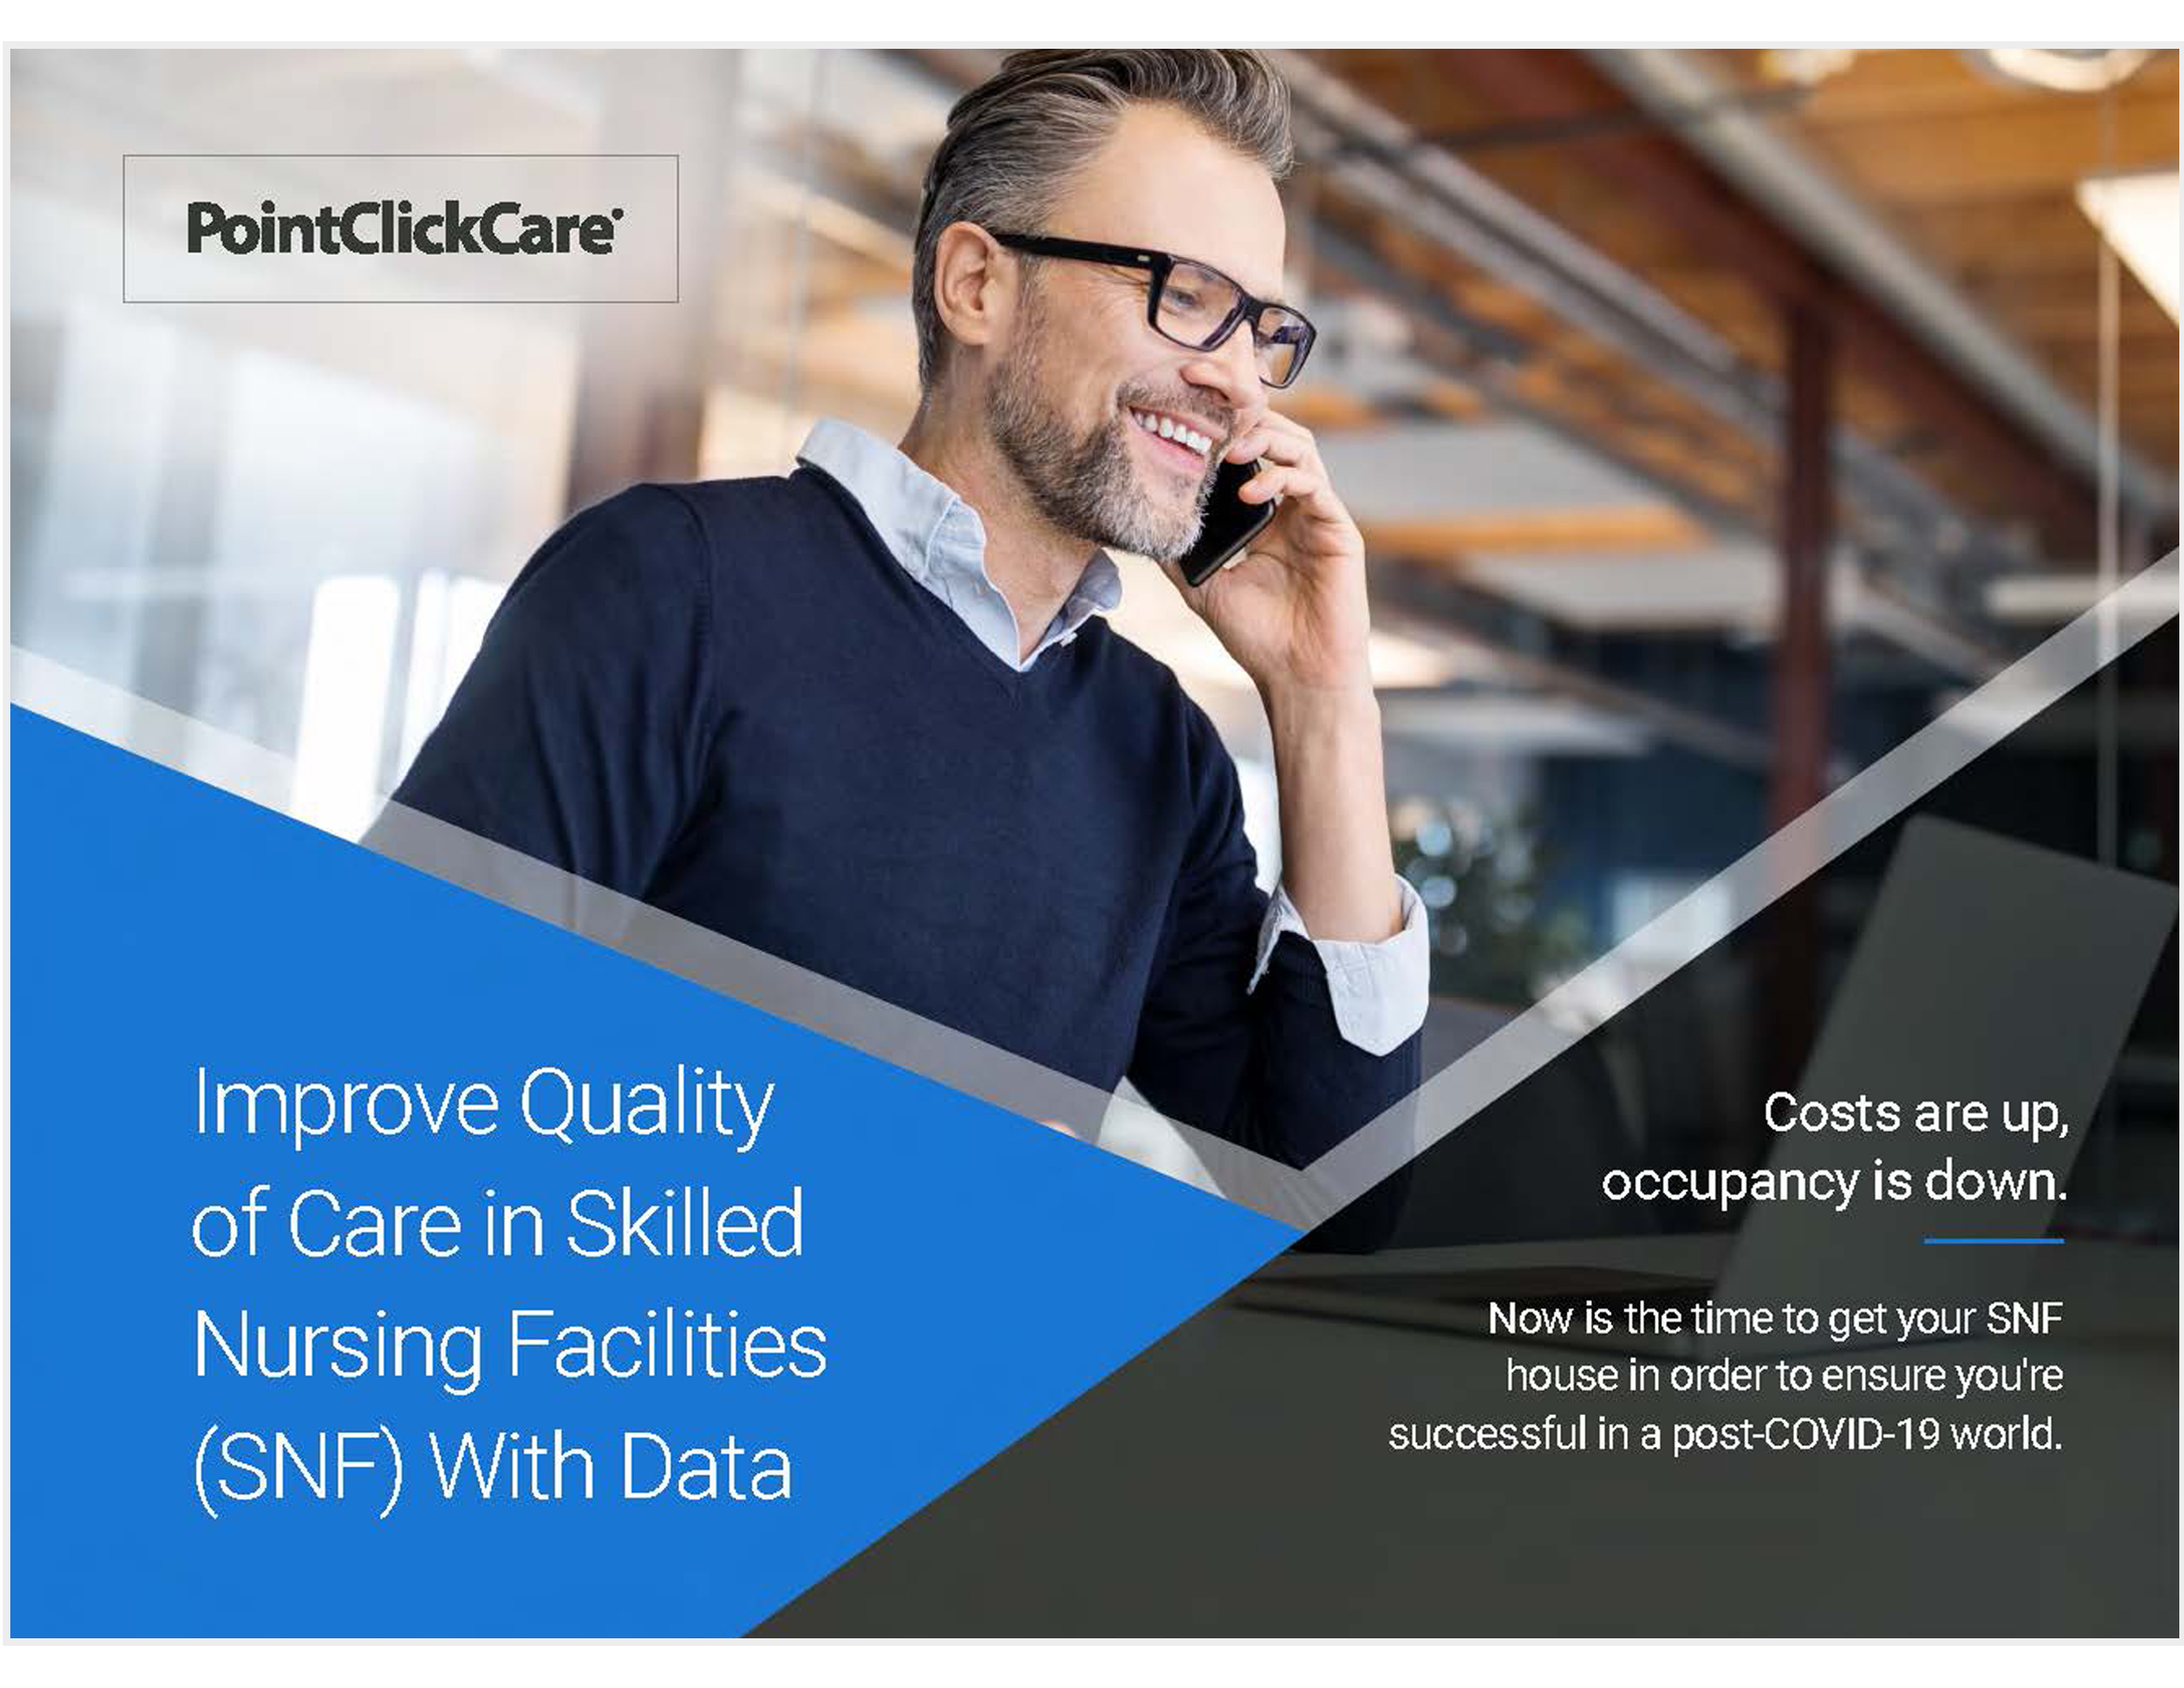 Improve Quality of Care in Skilled Nursing Facilities SNF with Data Infographic thumbn image